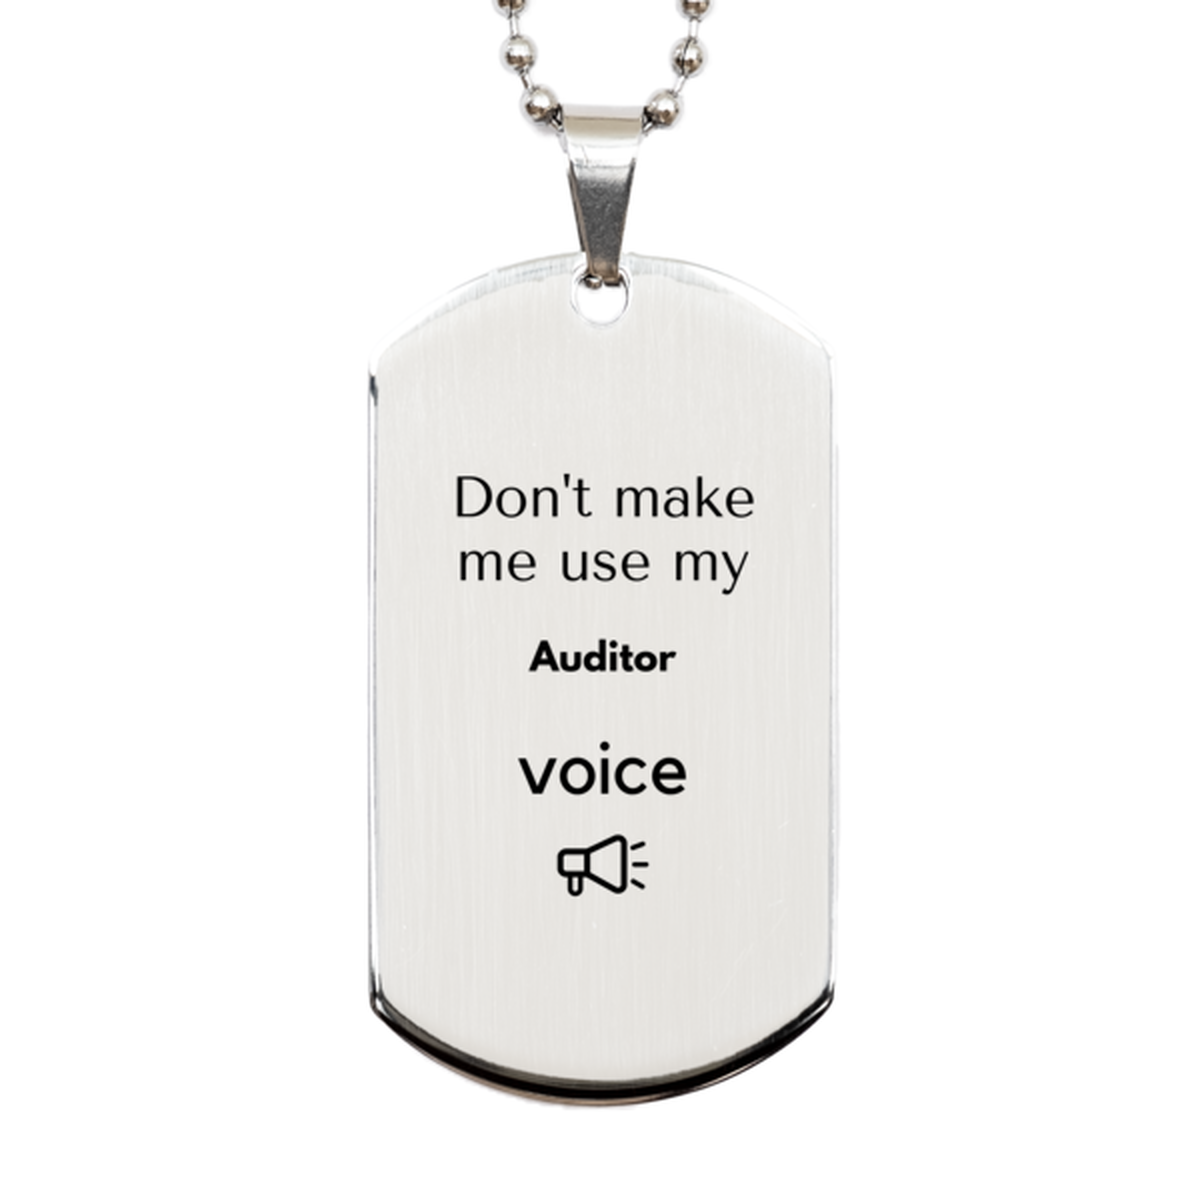 Don't make me use my Auditor voice, Sarcasm Auditor Gifts, Christmas Auditor Silver Dog Tag Birthday Unique Gifts For Auditor Coworkers, Men, Women, Colleague, Friends